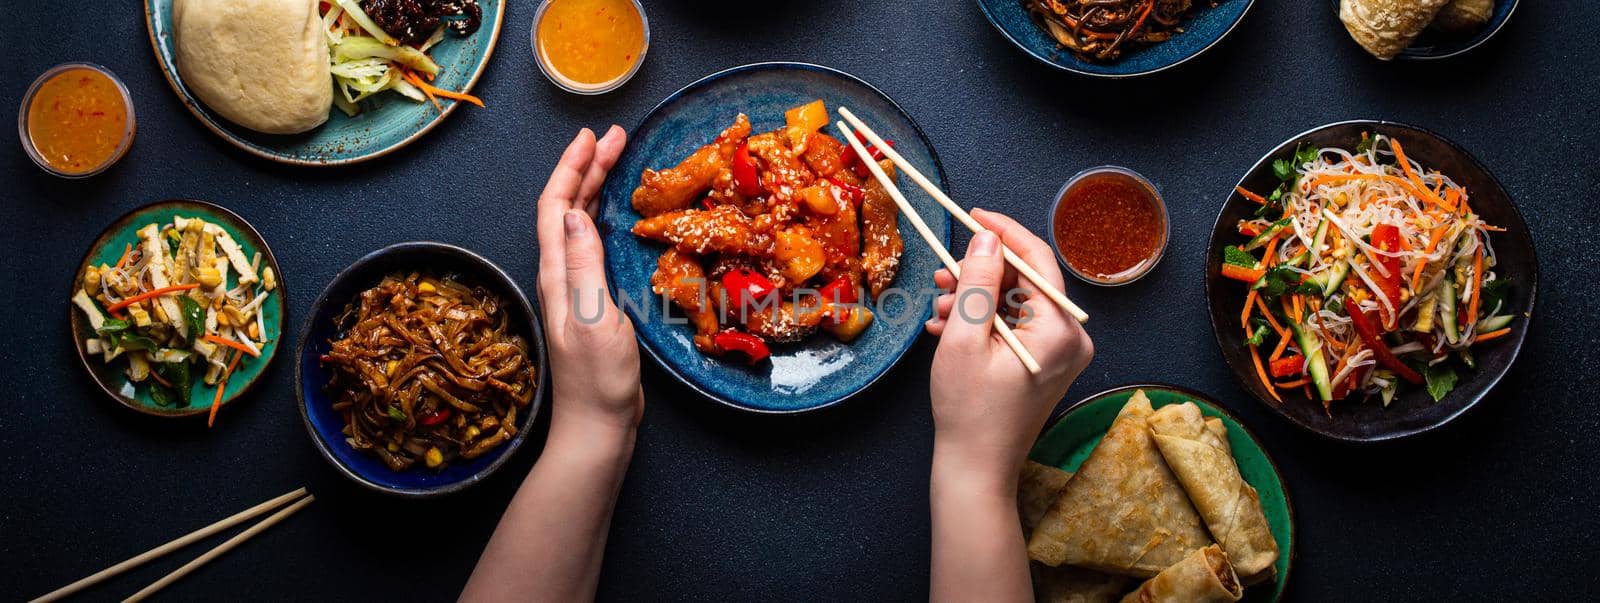 Set of Chinese dishes on table, female hands holding chopsticks by its_al_dente